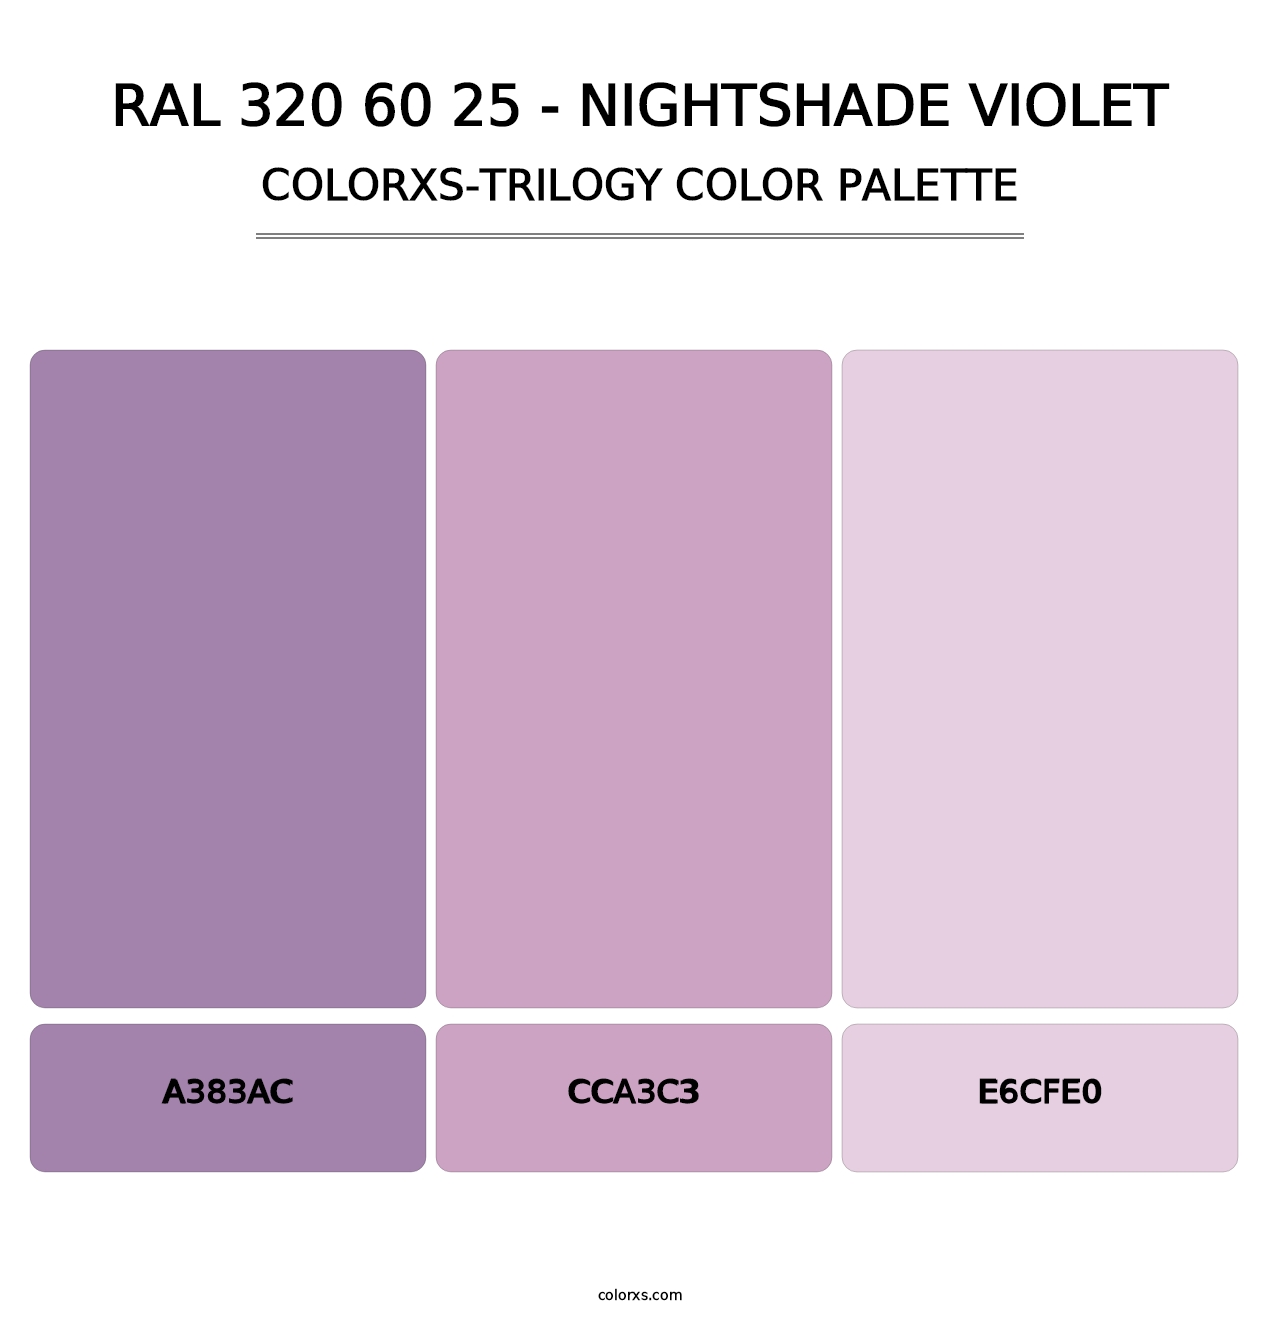 RAL 320 60 25 - Nightshade Violet - Colorxs Trilogy Palette